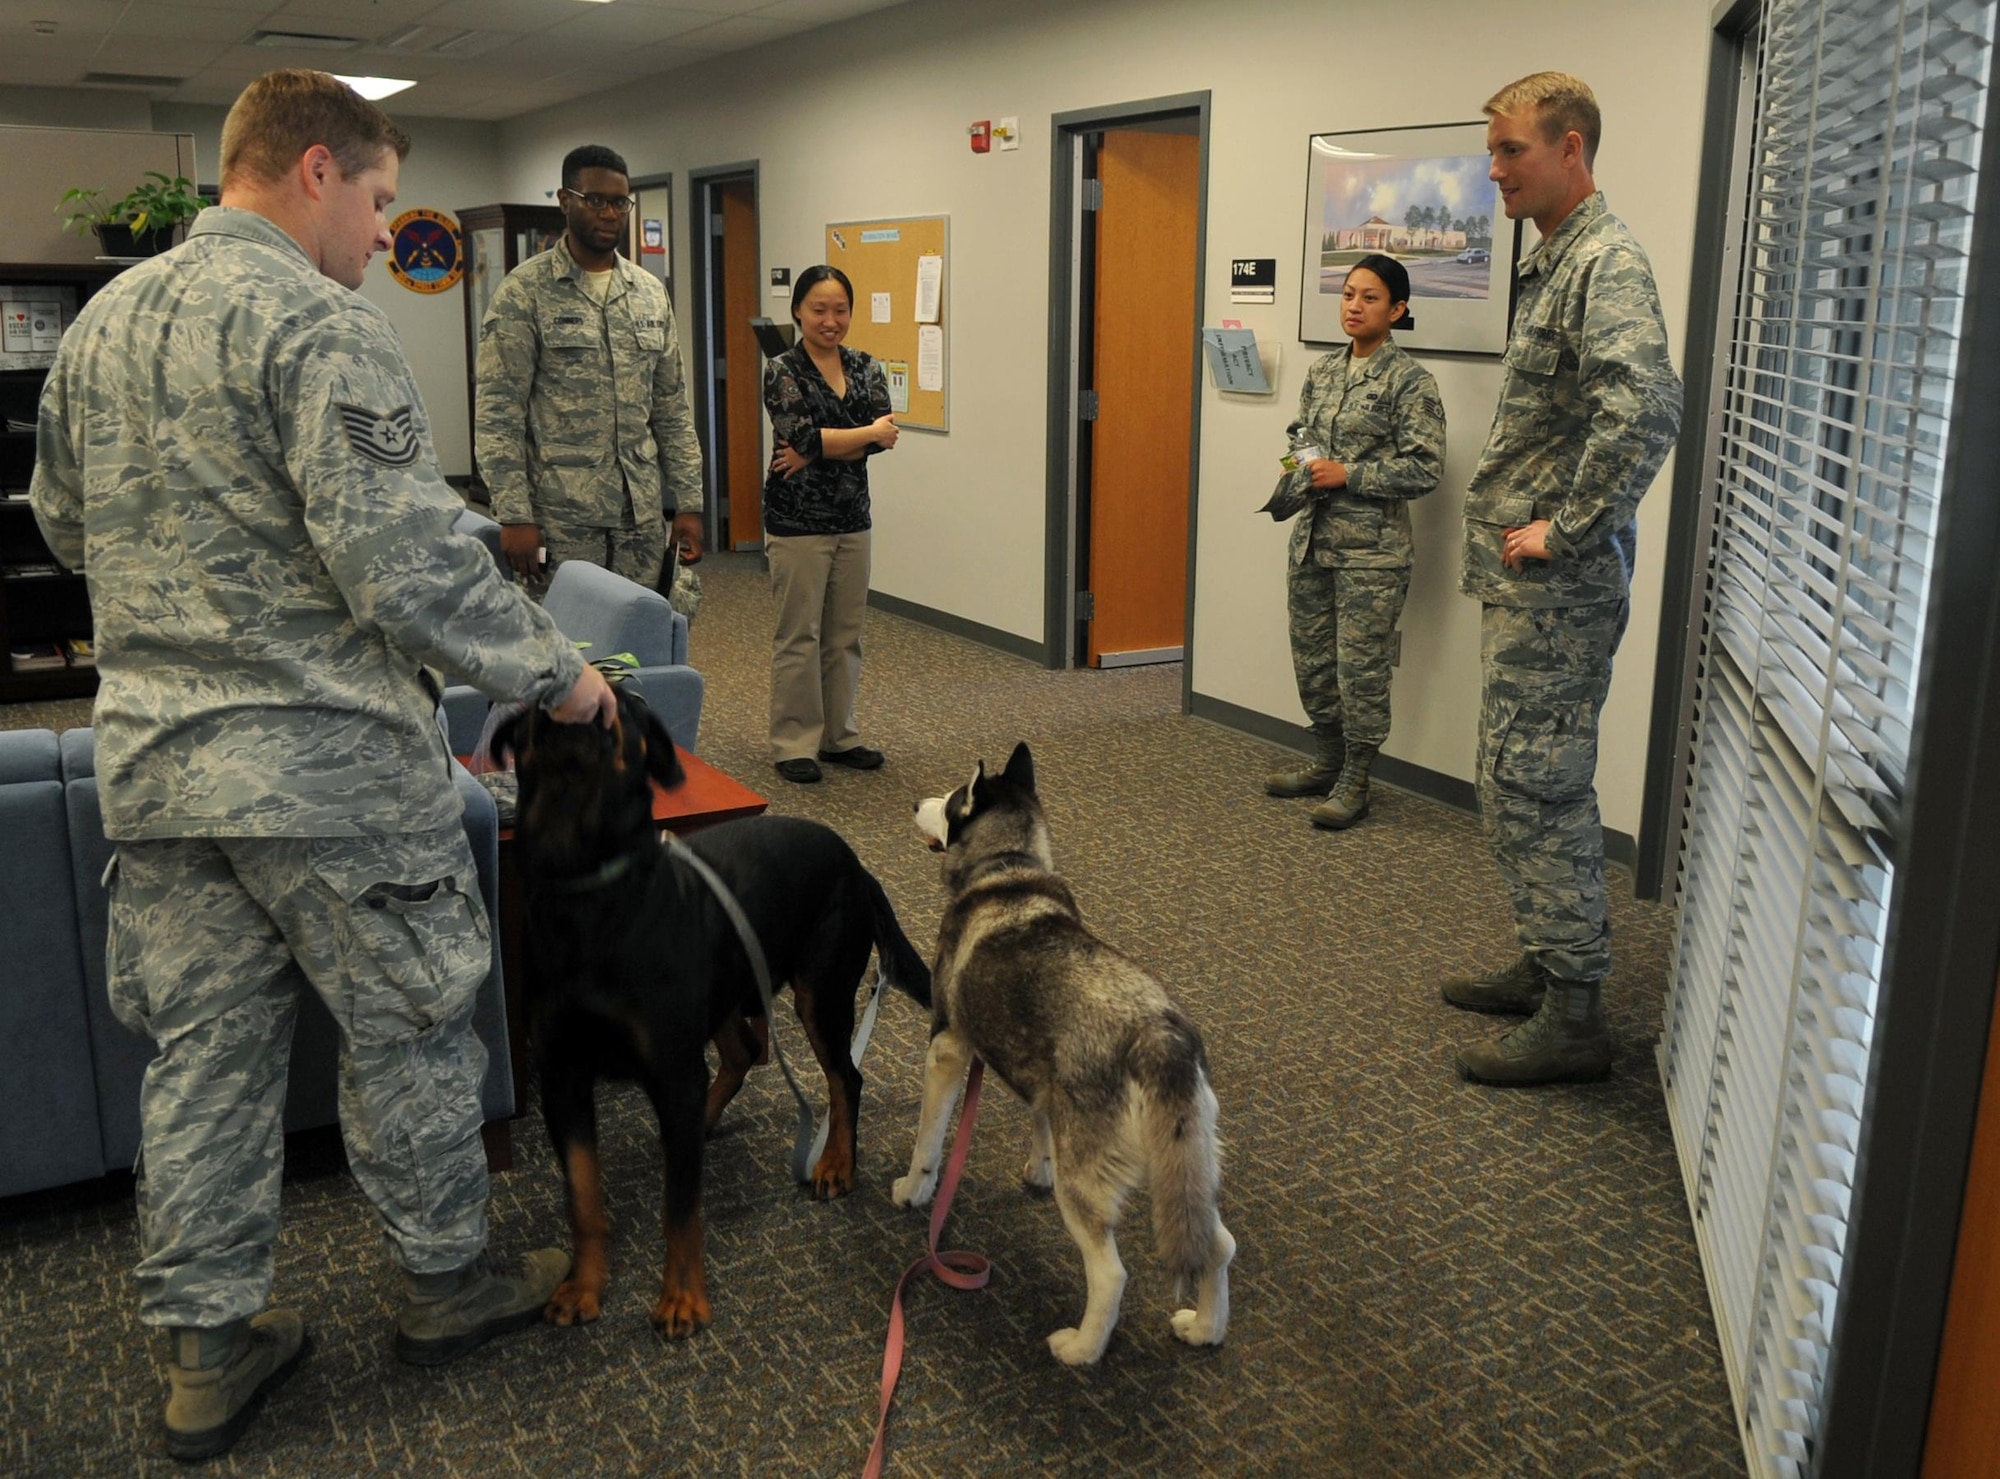 Tech. Sgt. John McIntosh, Buckley Air Force Base Chapel operations NCO in charge, takes his dogs to visit with Team Buckley as an opportunity to raise morale September 15, 2016, at Buckley AFB, Colo. Chaplain assistants are crucial to keeping the morale of Airmen high to insure they’re spiritually fit to perform their jobs. (U.S. Air Force photo by Airman Holden S. Faul/ Released) 